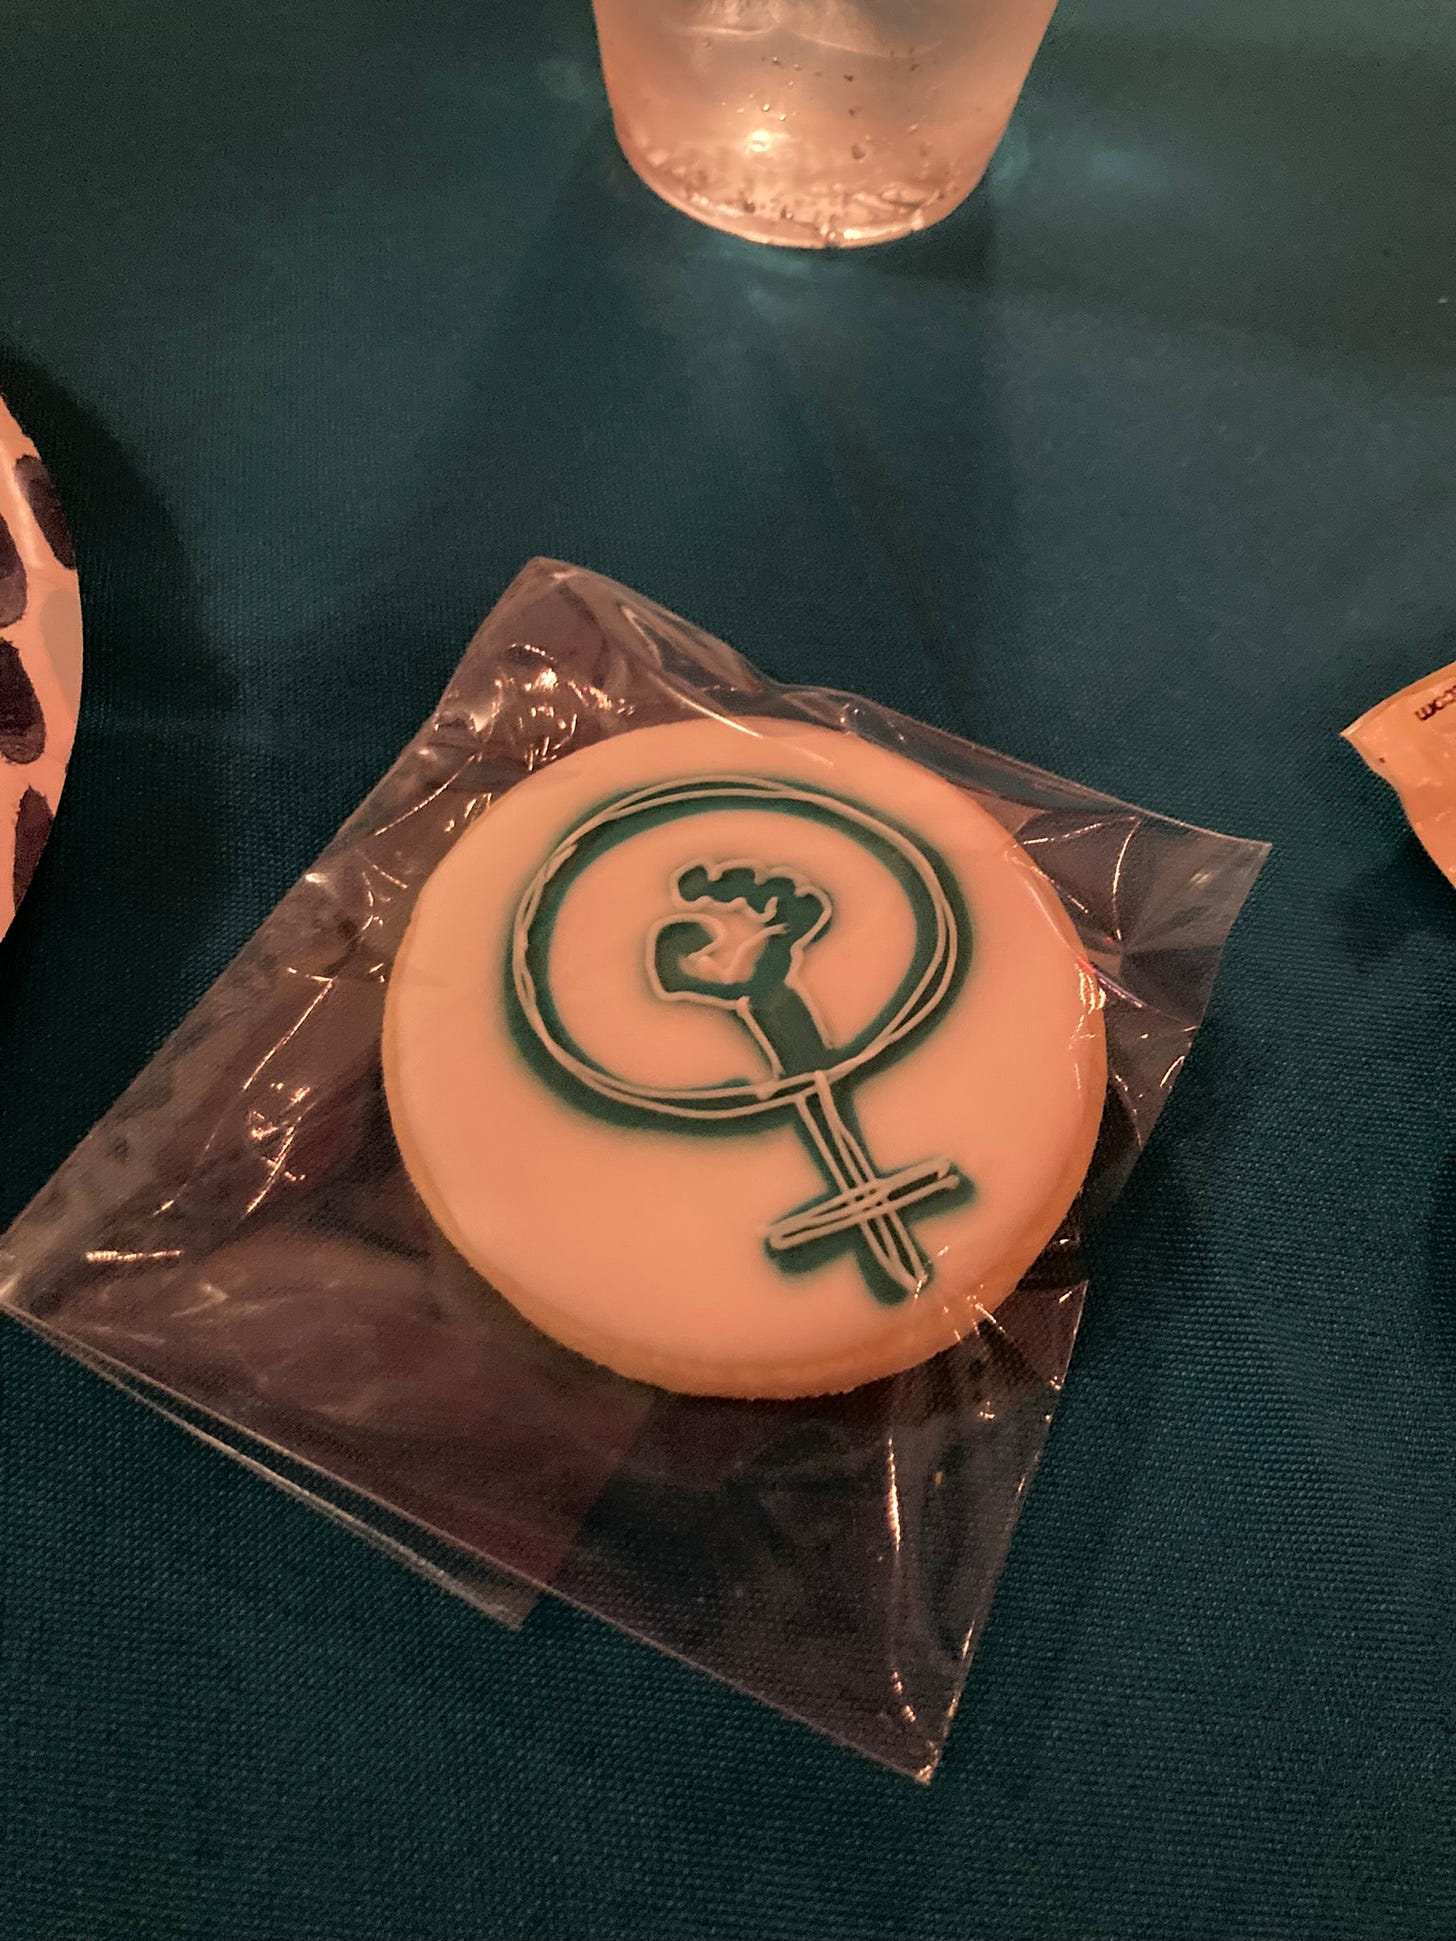 An iced cookie with a design of the symbol for women with a fist in the circle